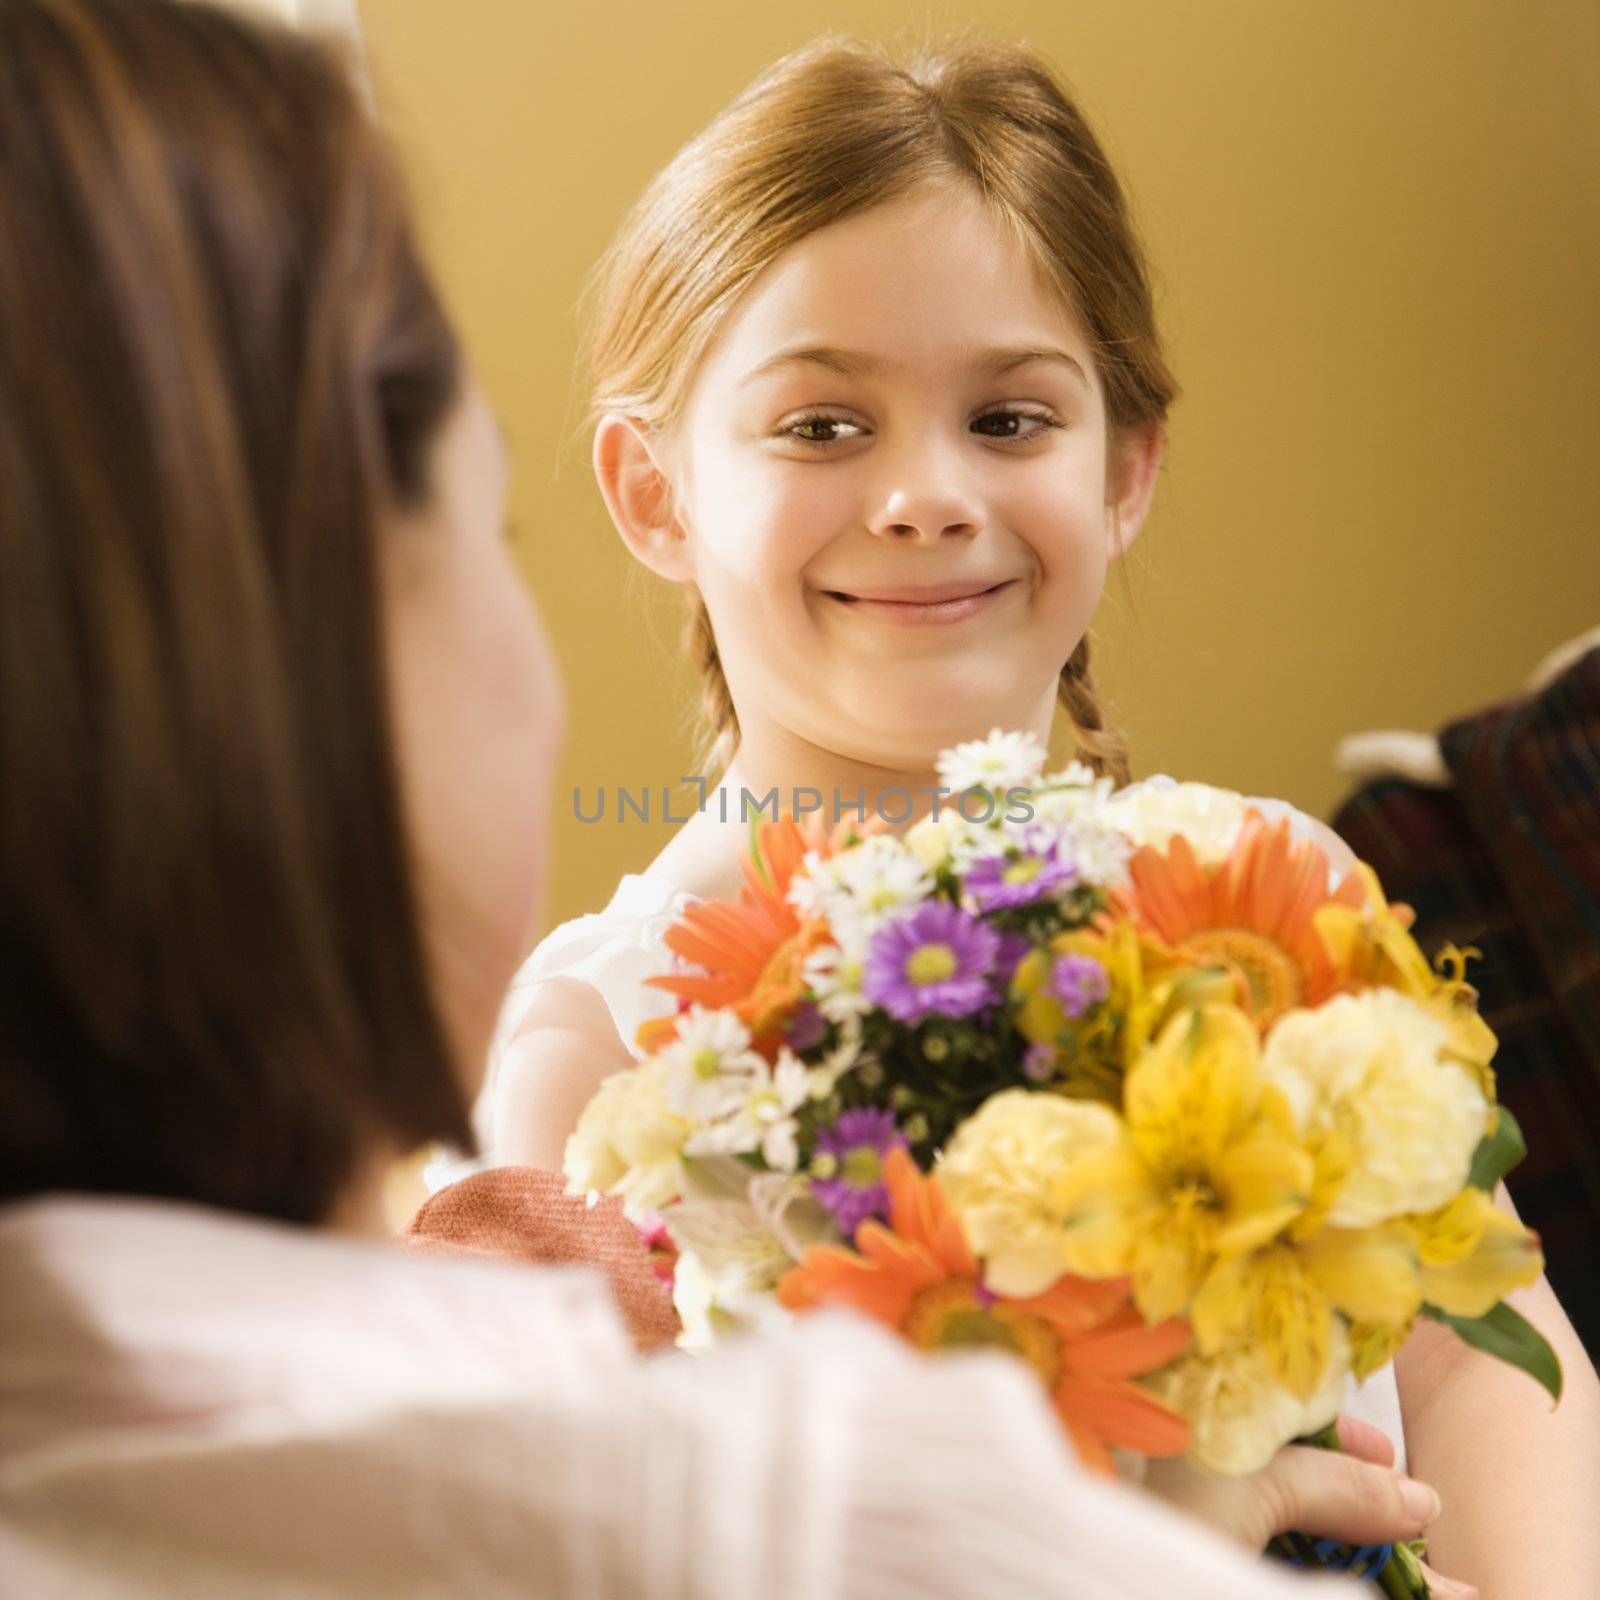 Girl giving mom flowers. by iofoto